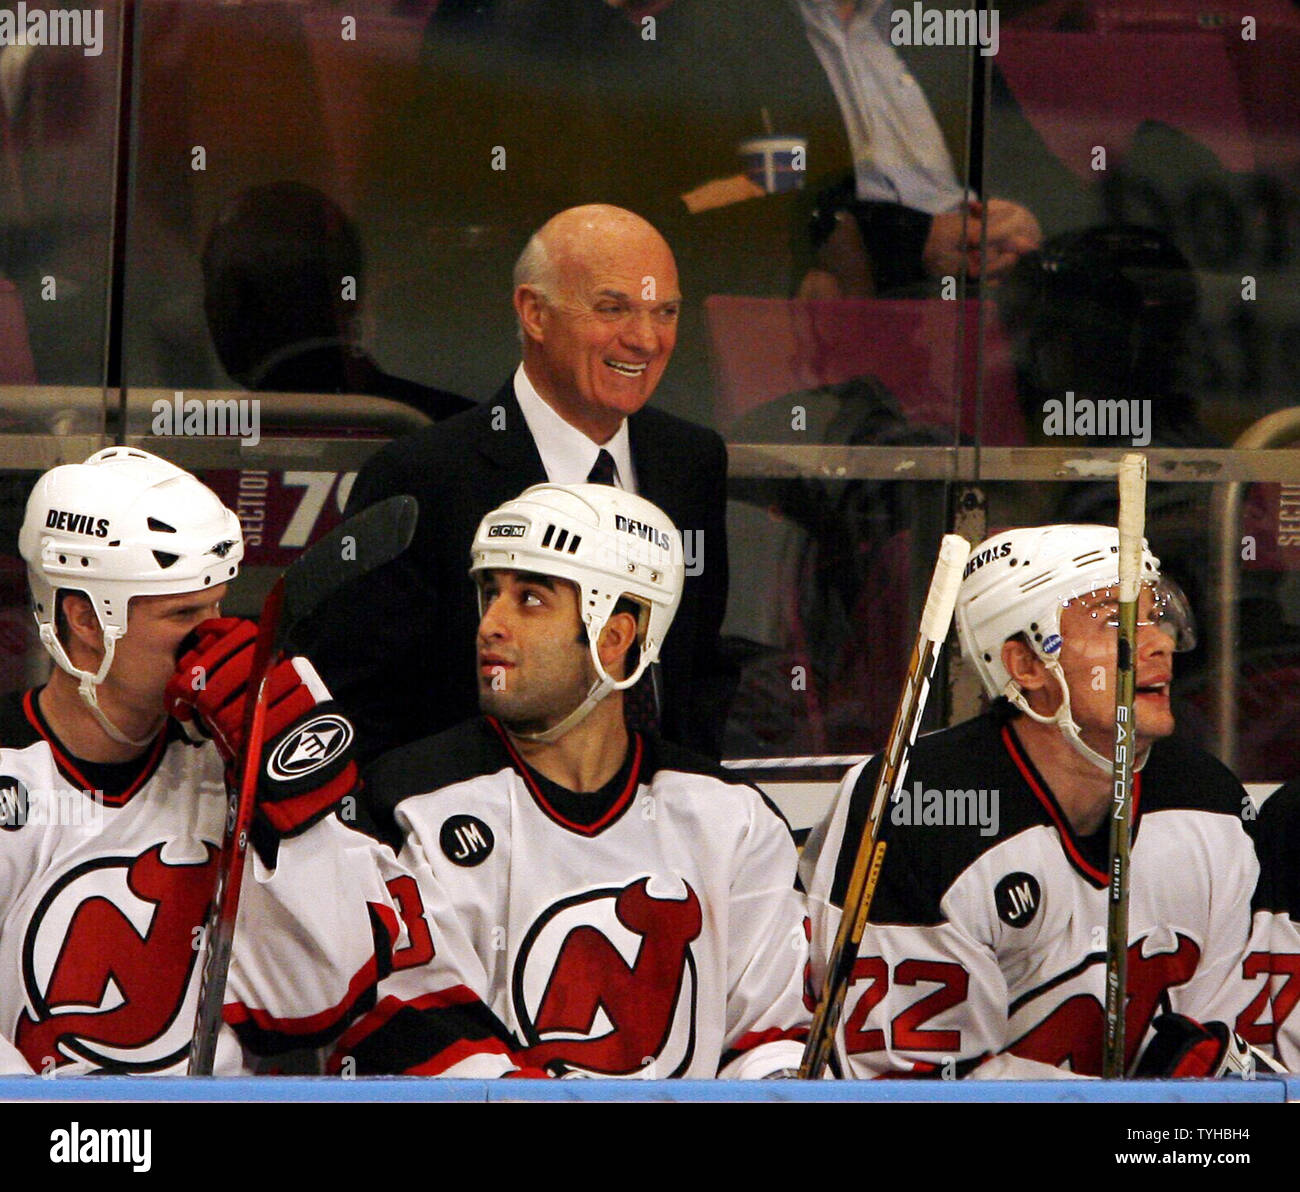 New Jersey Devils interim head coach Lou Lamoriello reacts in the second  period at Madison Square Garden in New York City on December 20, 2005. The New  Jersey Devils defeated the New